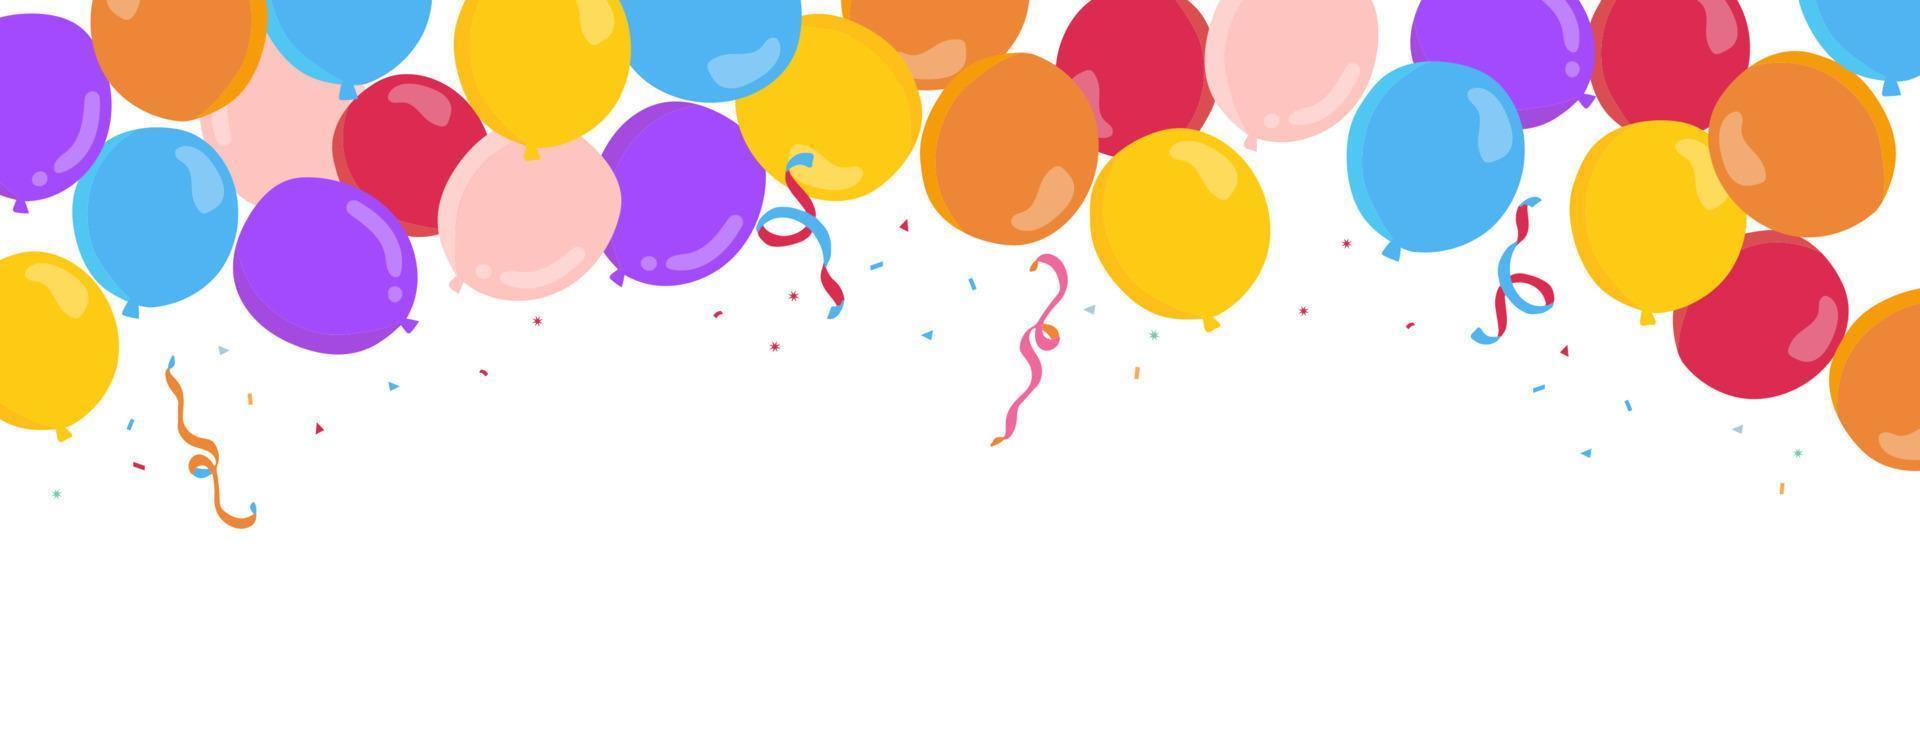 vivid balloon on white background for party banner vector